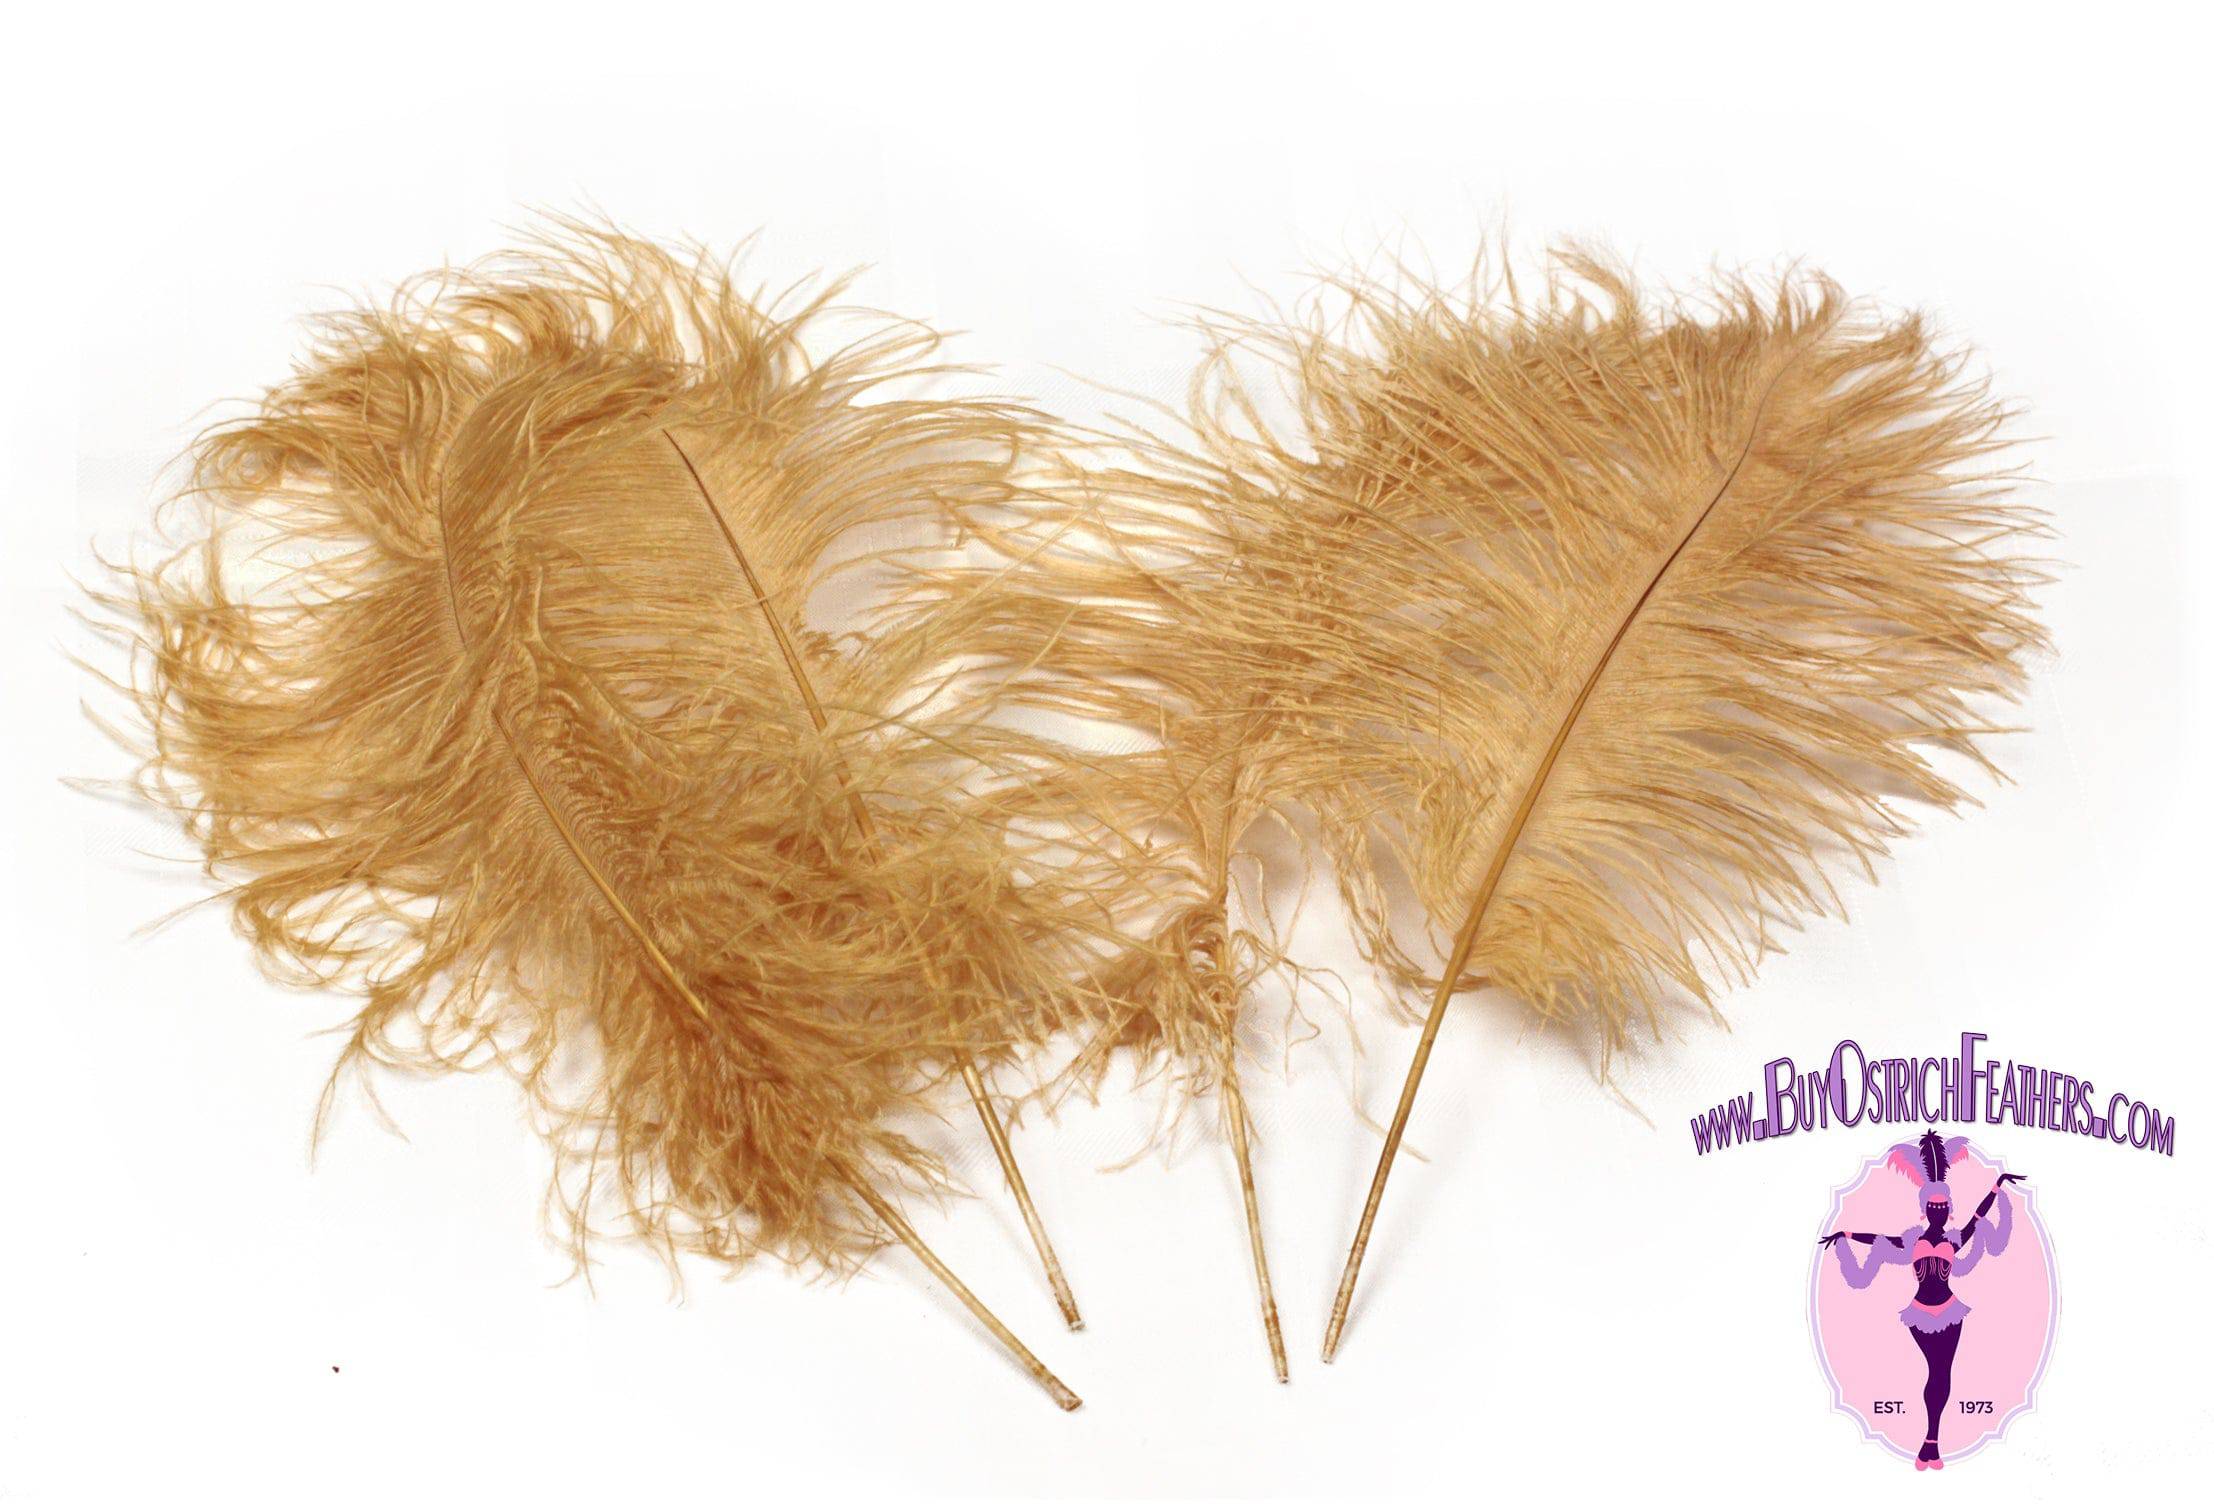 Ostrich Feather Tail Plumes 11-14 (Black) for Sale Online